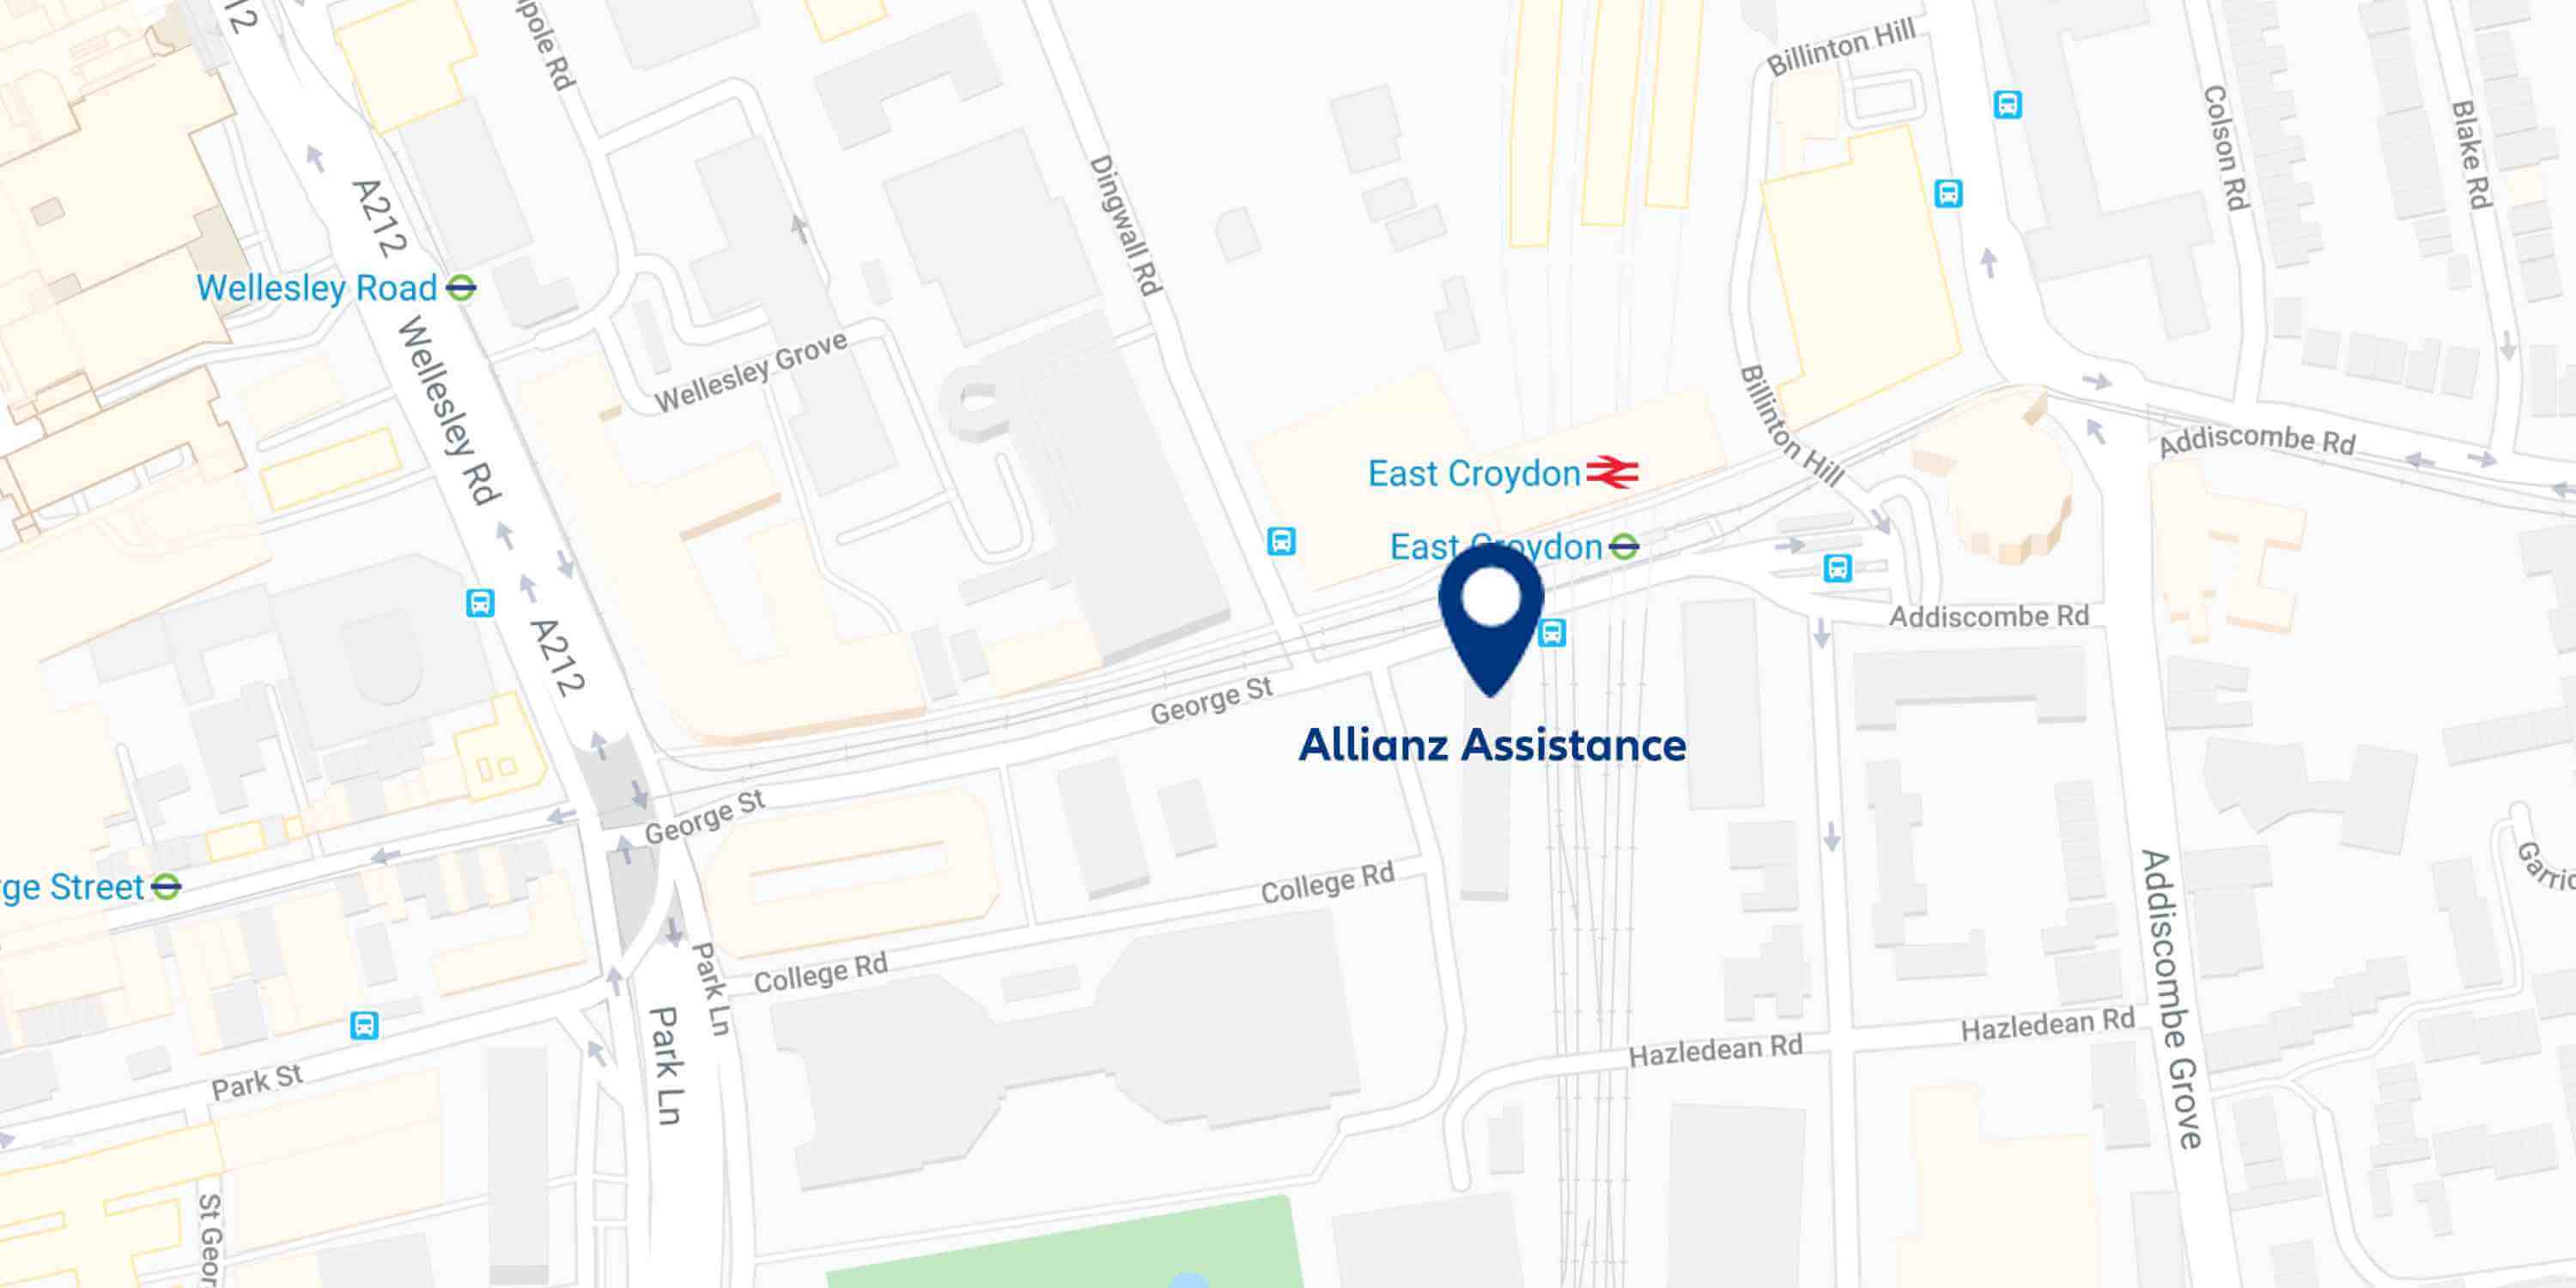 Image of East Croydon office on the map